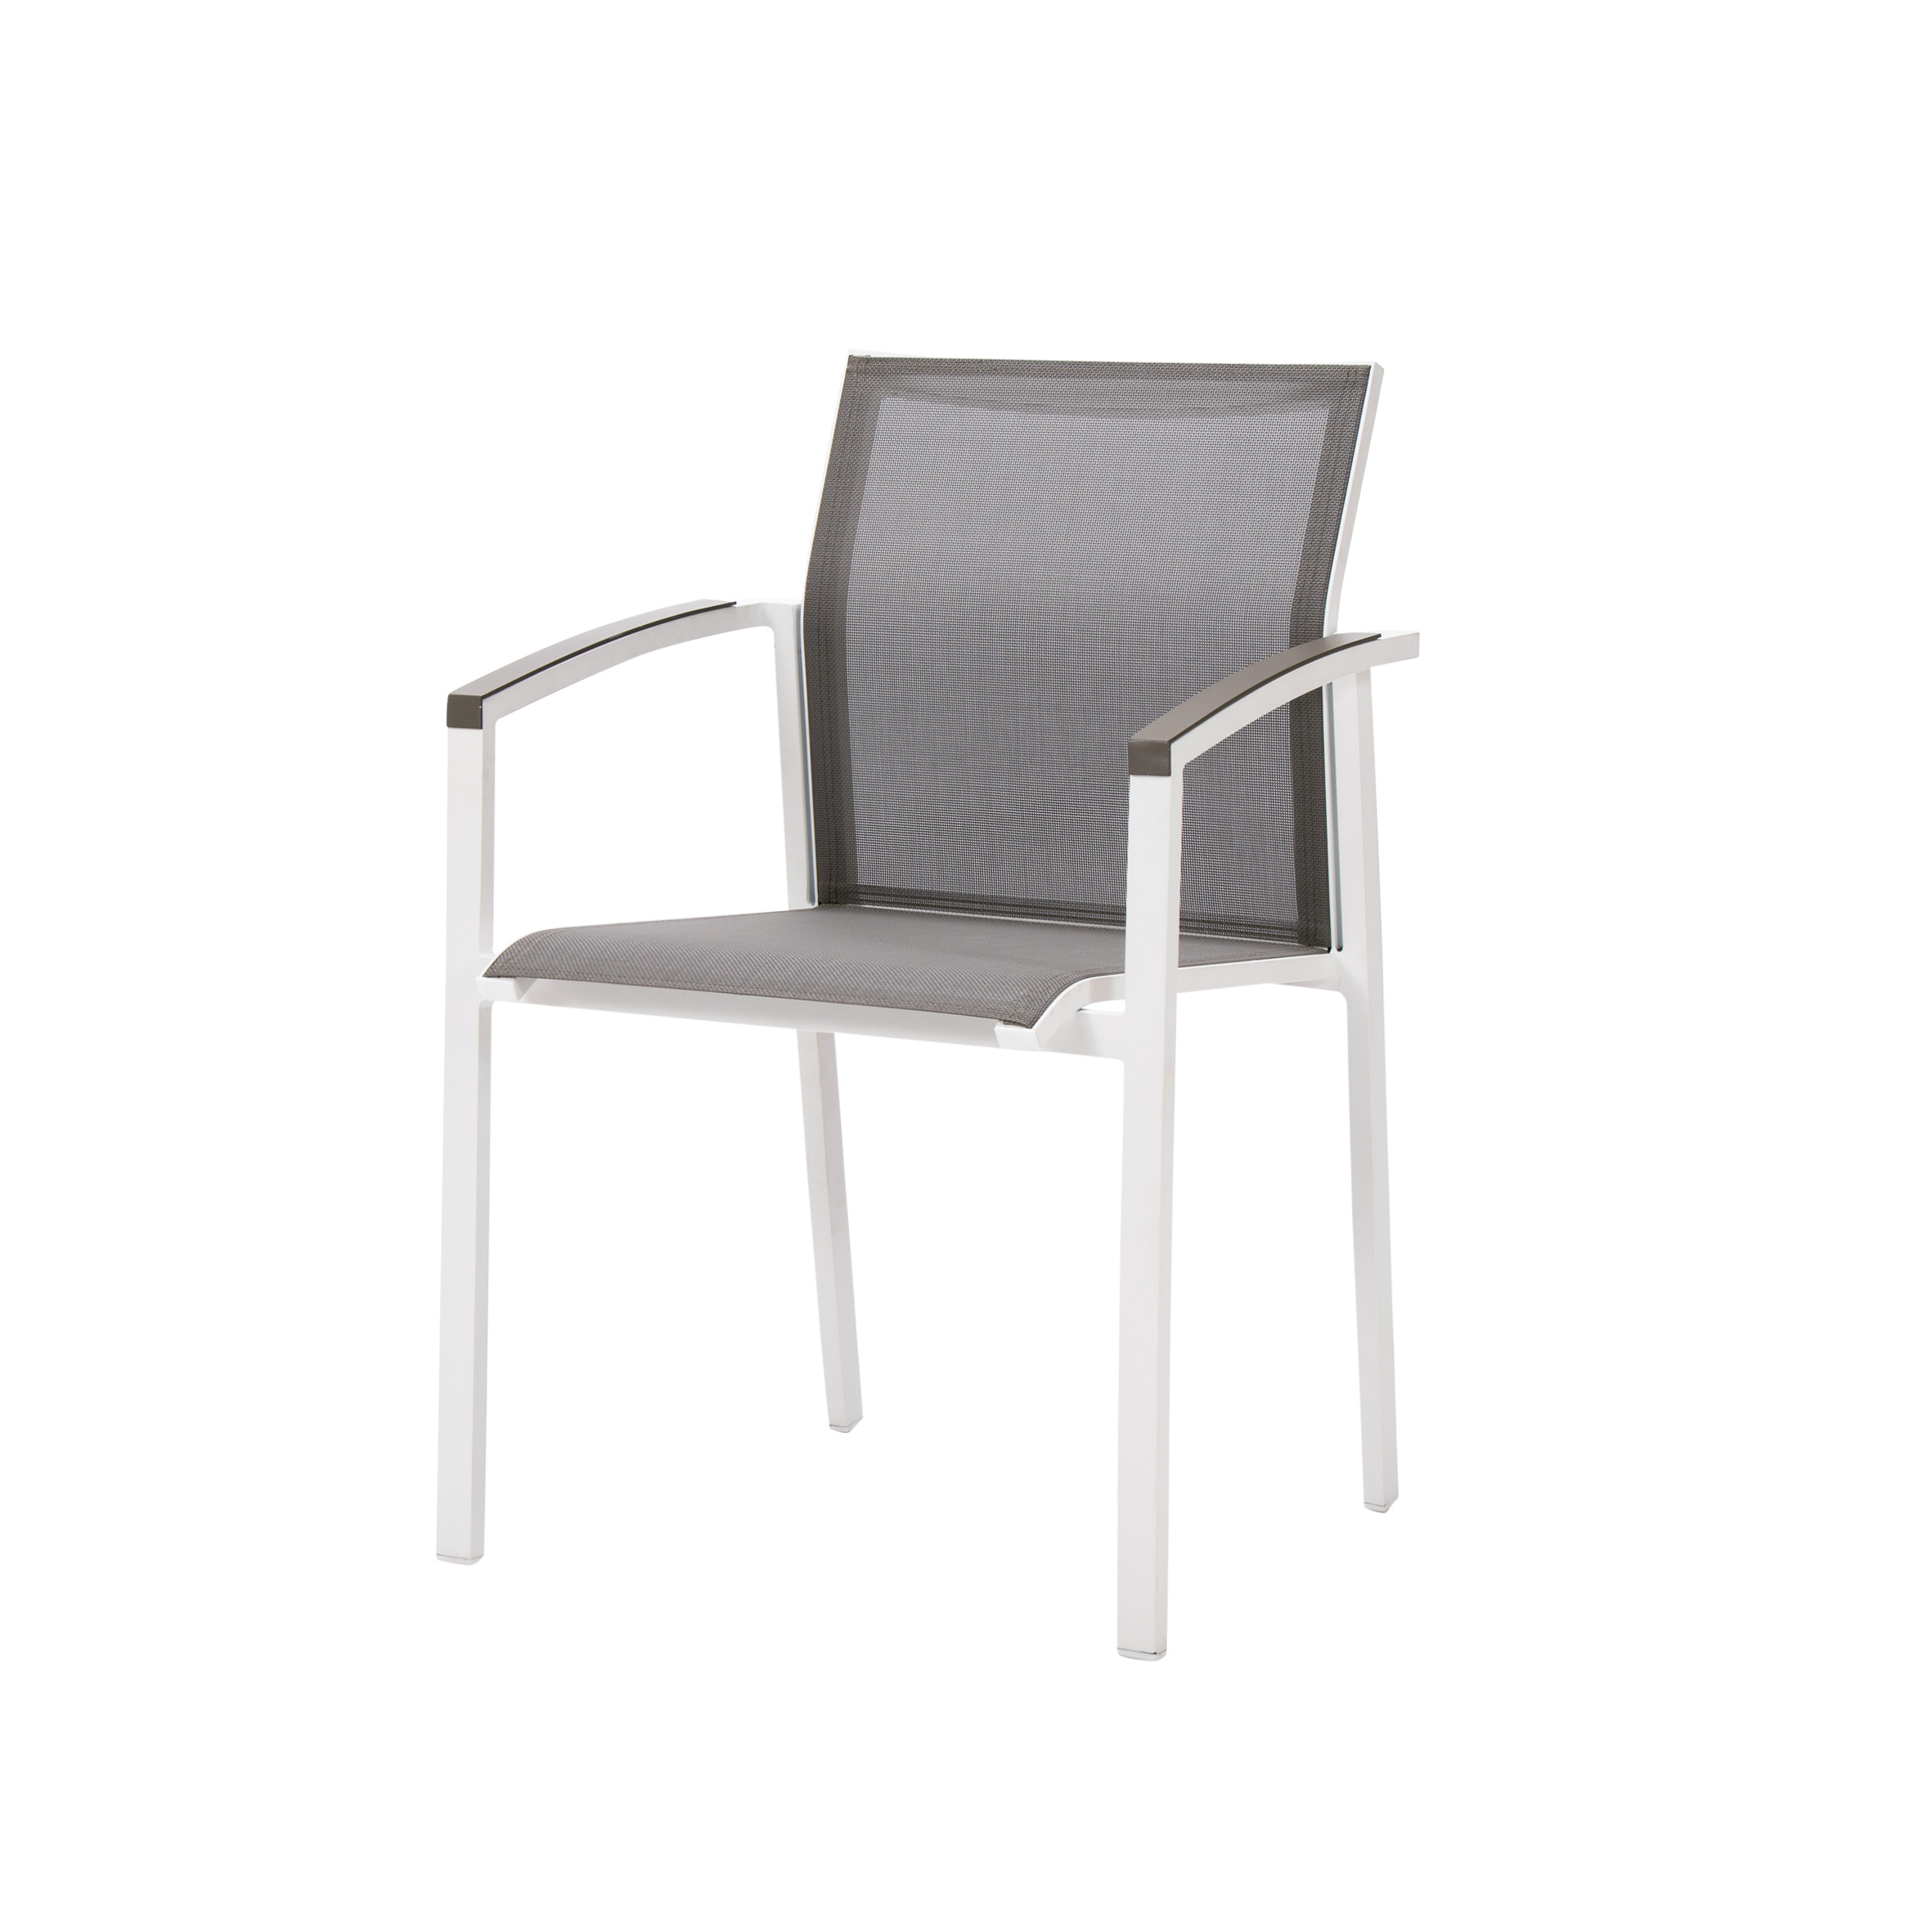 Ronda textilene dining chair Featured Image